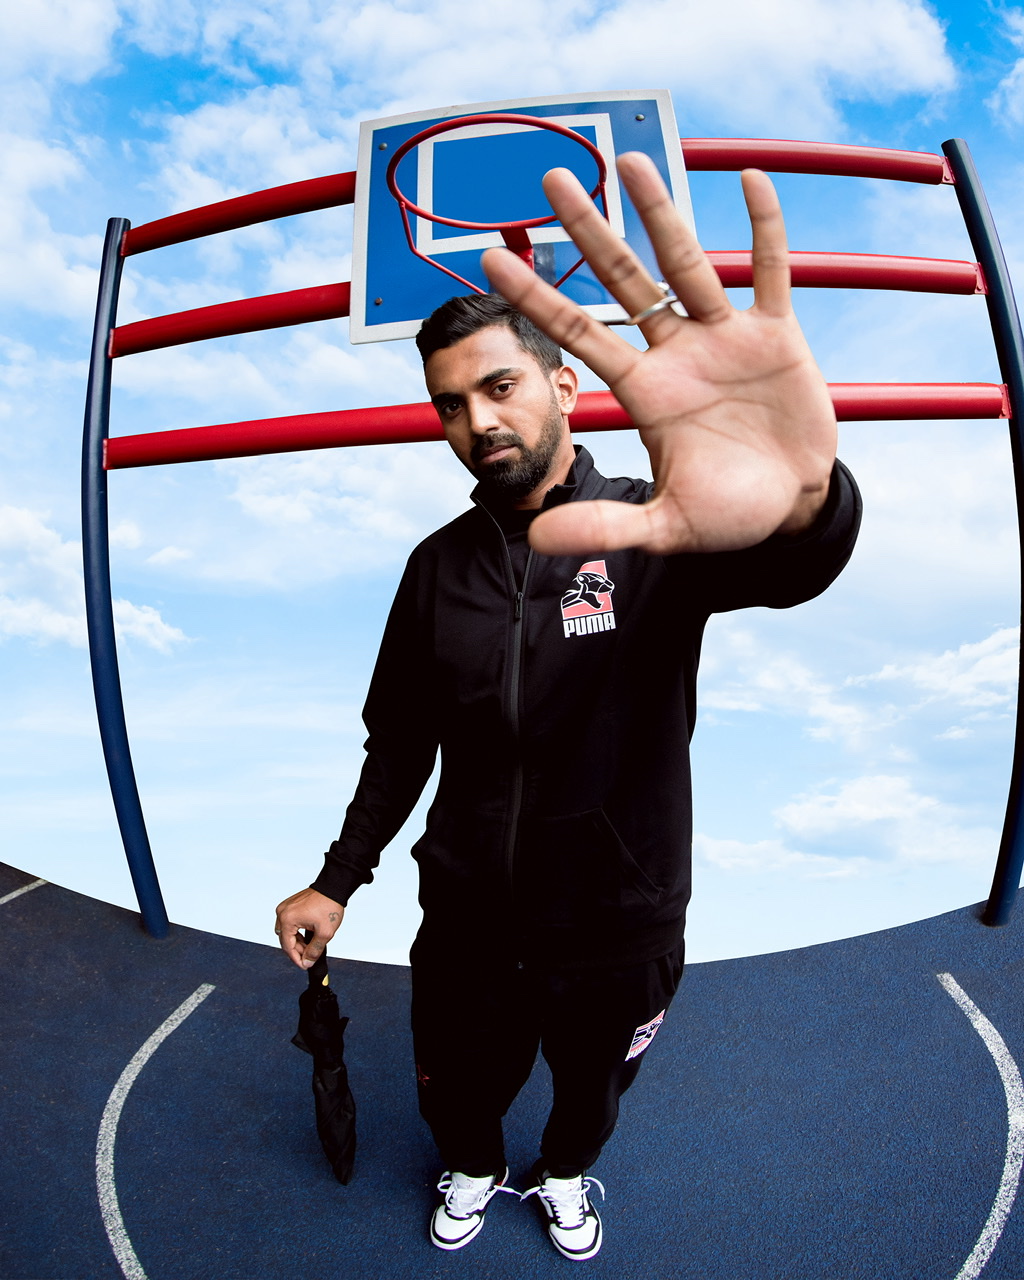 PUMA and Flipkart partner with Cricketer KL Rahul to launch 1DER, a streetwear-inspired athleisure range